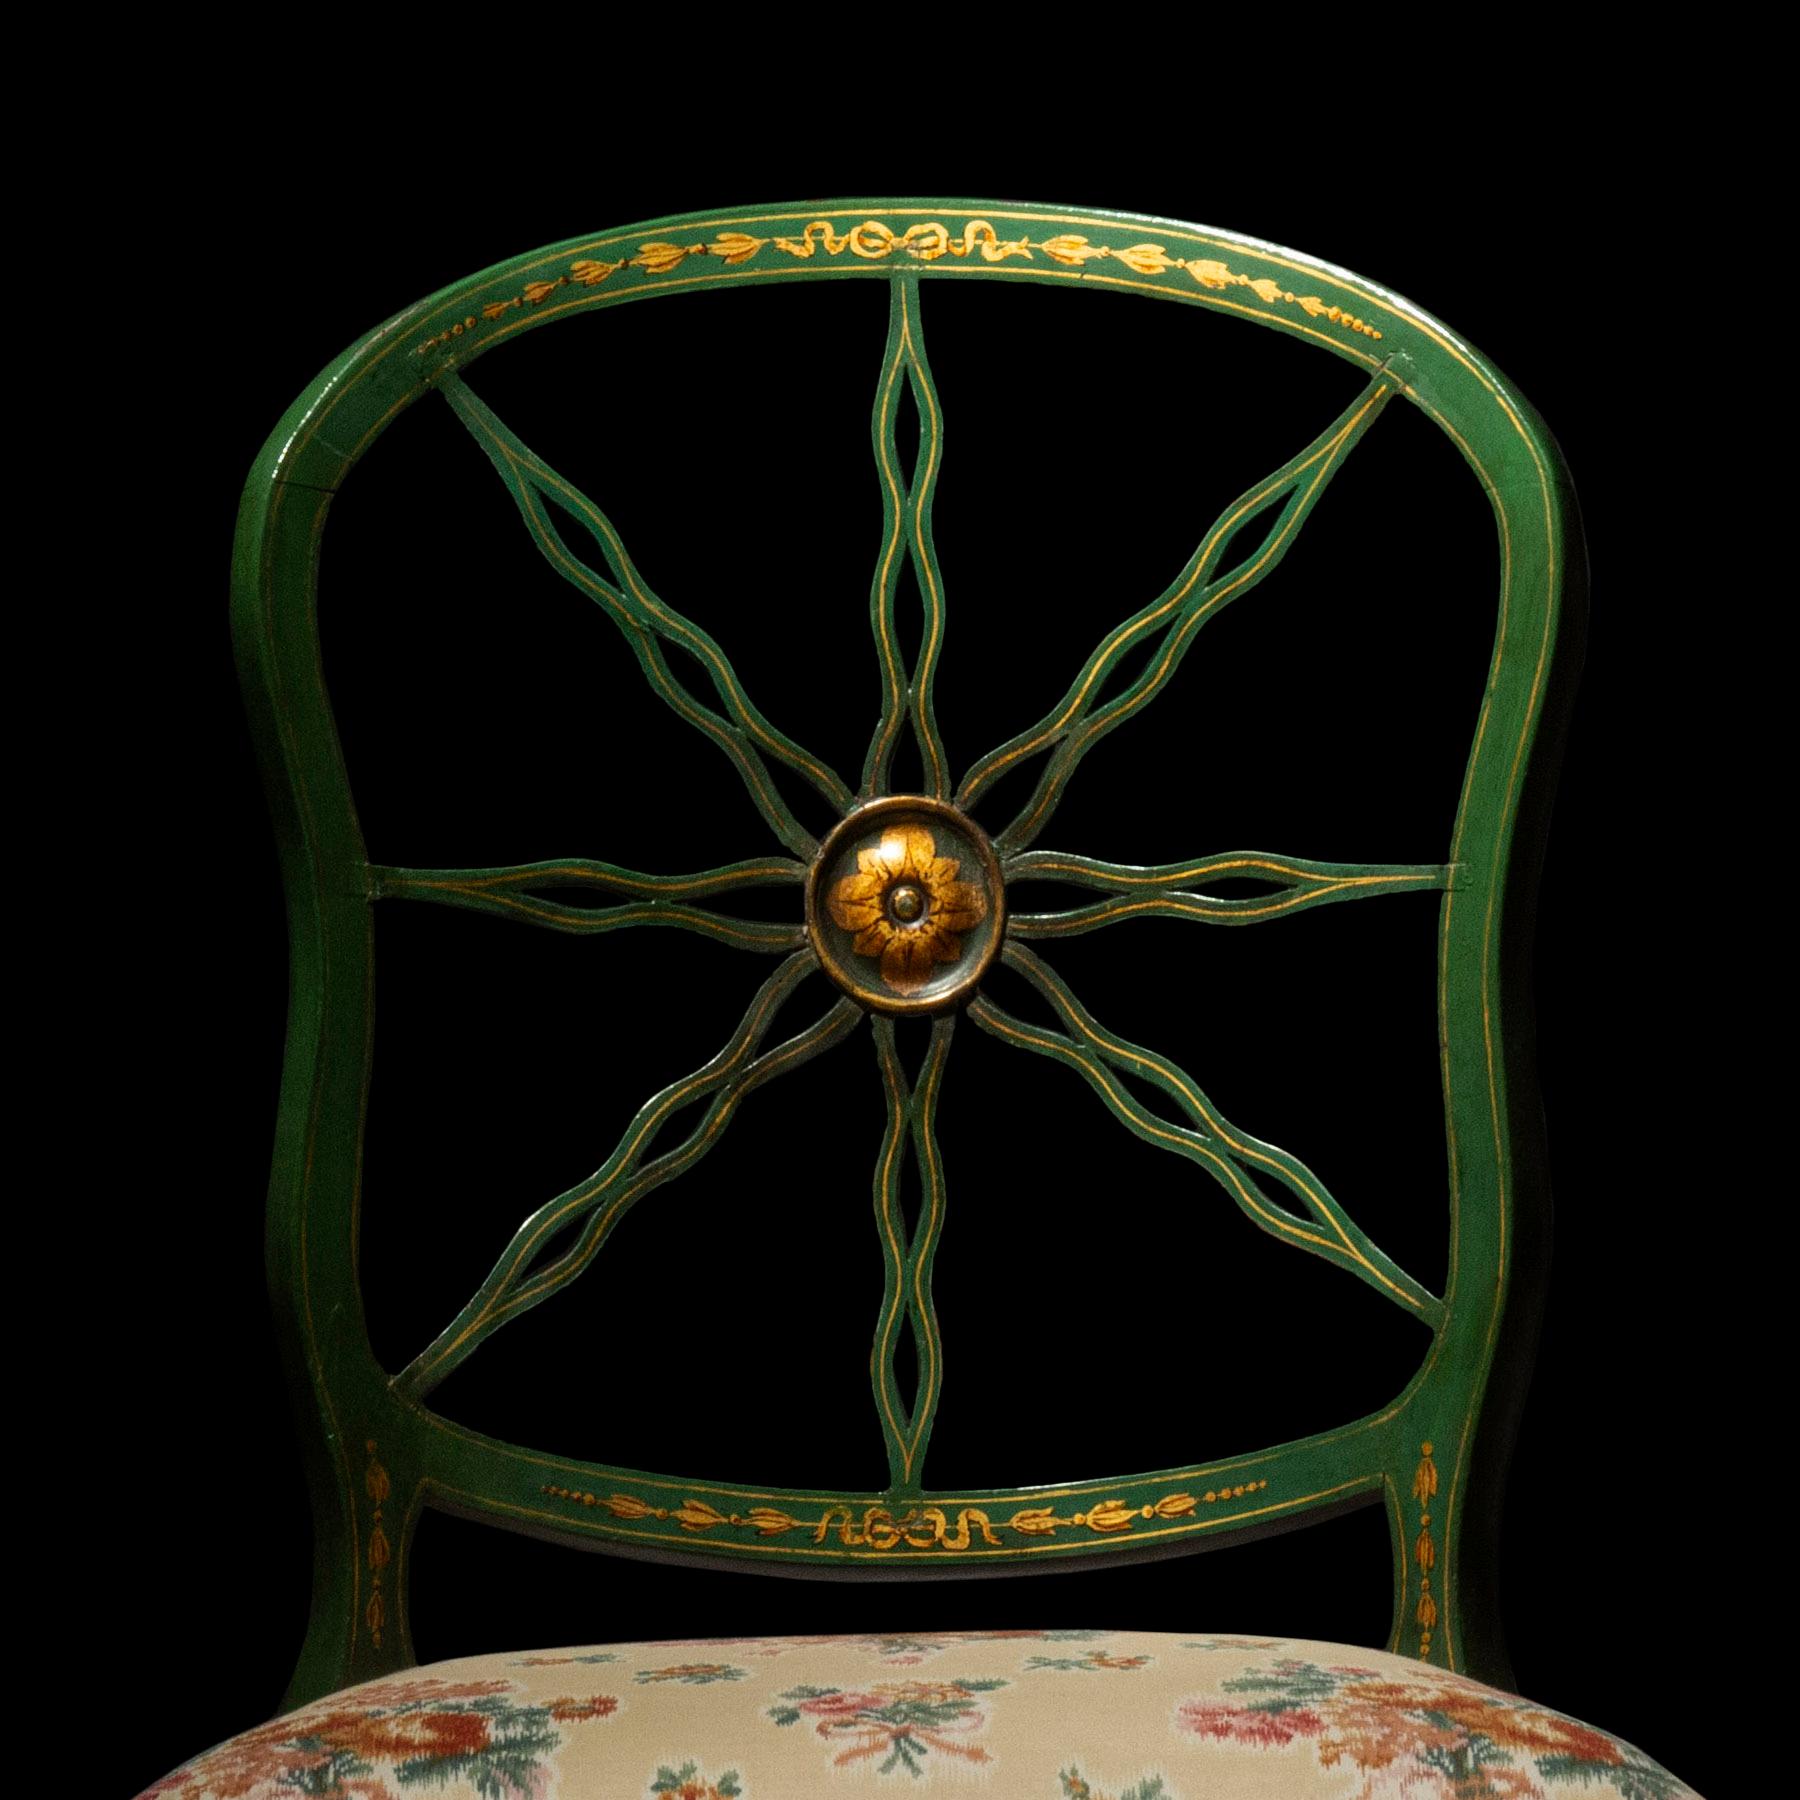 Wood Pair of Antique Green Painted Chairs - 3 pairs available